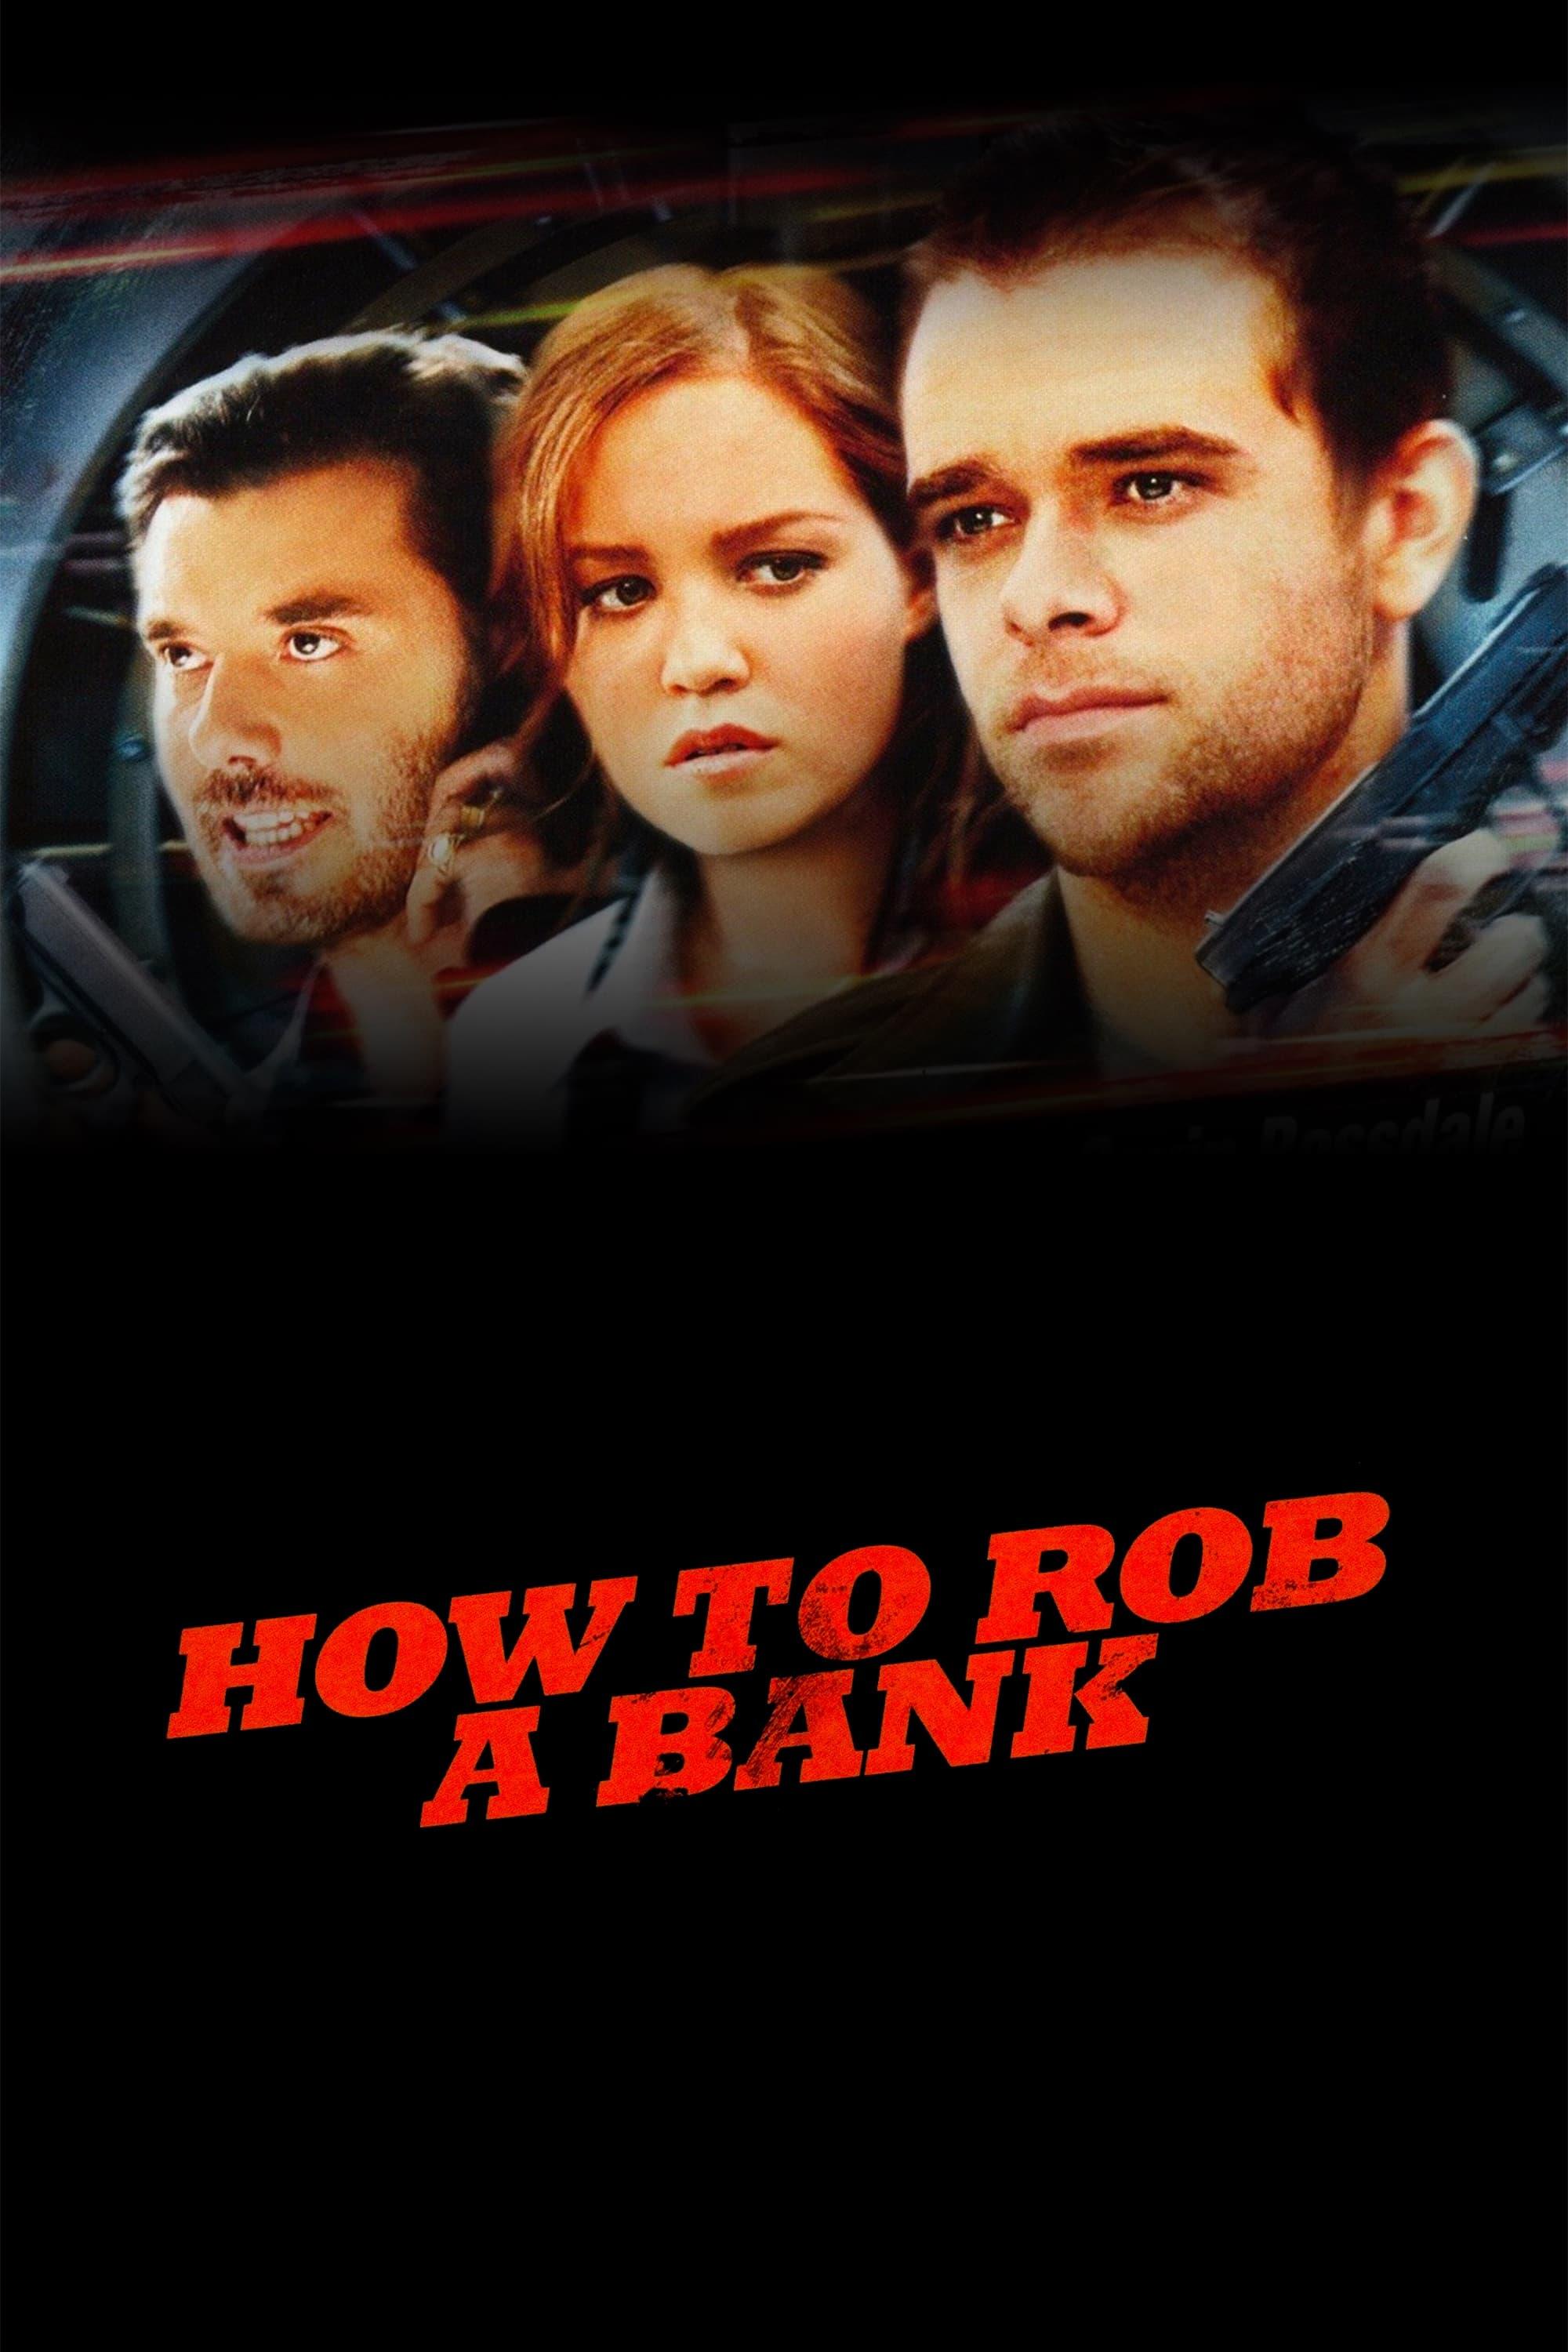 How to Rob a Bank poster